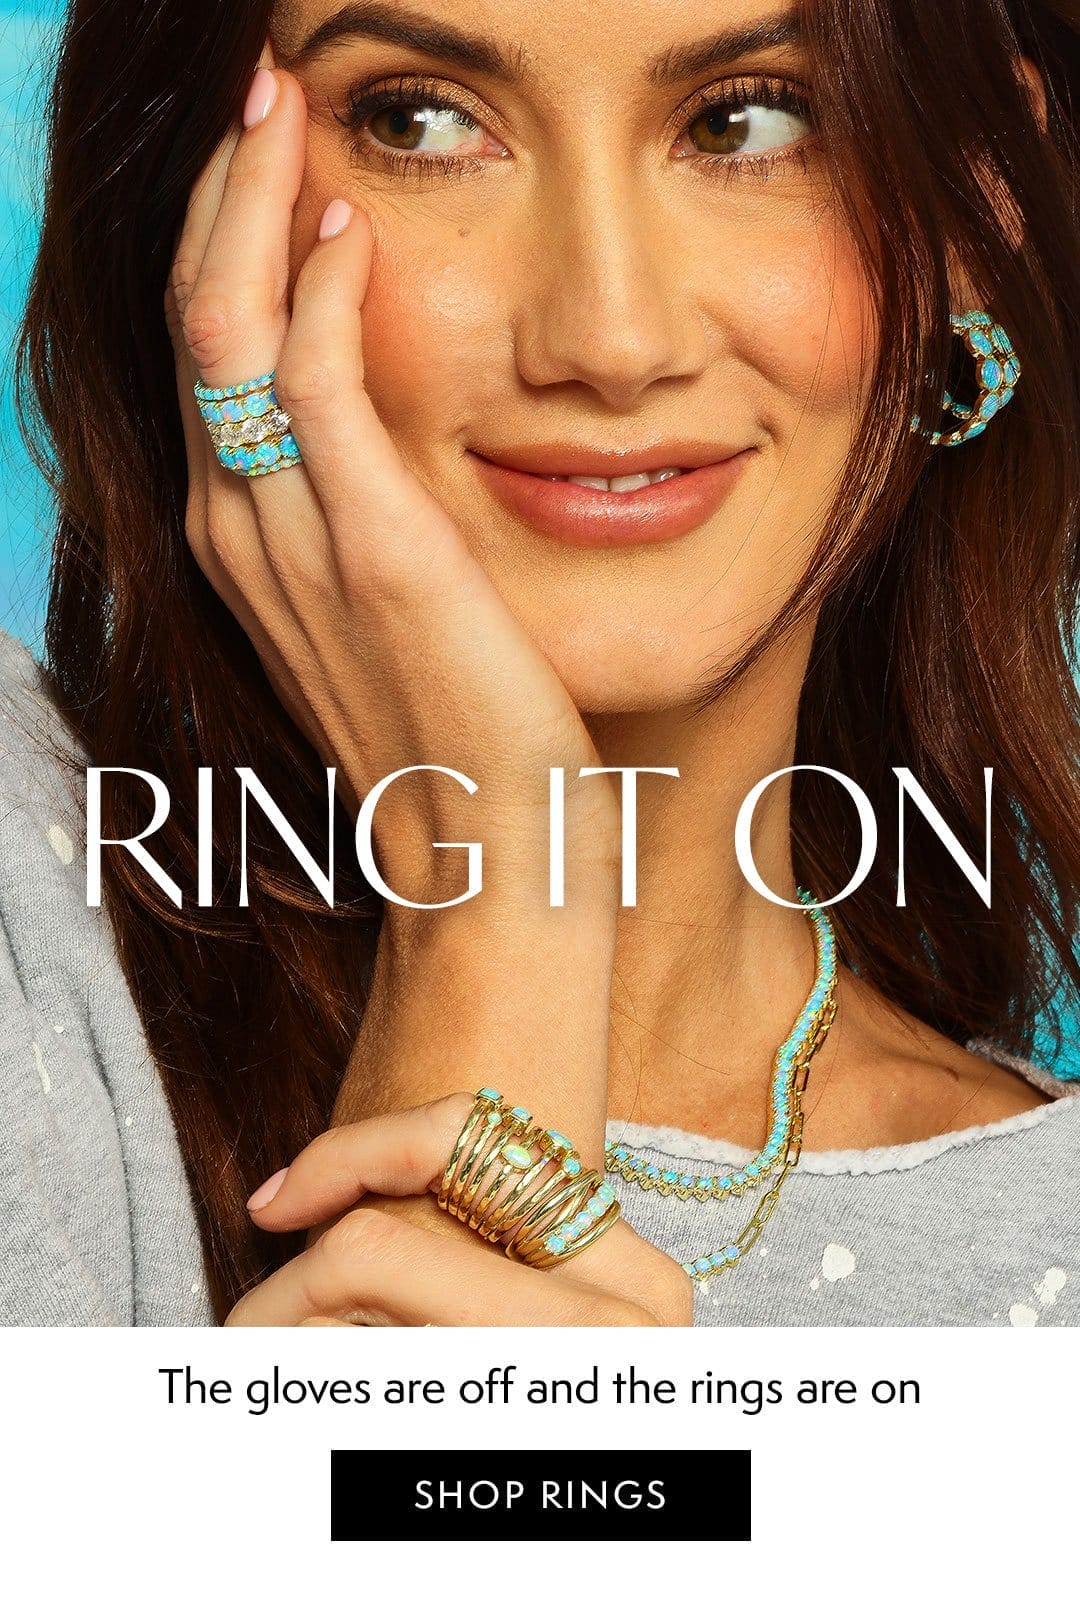 Ring It On. Shop Rings